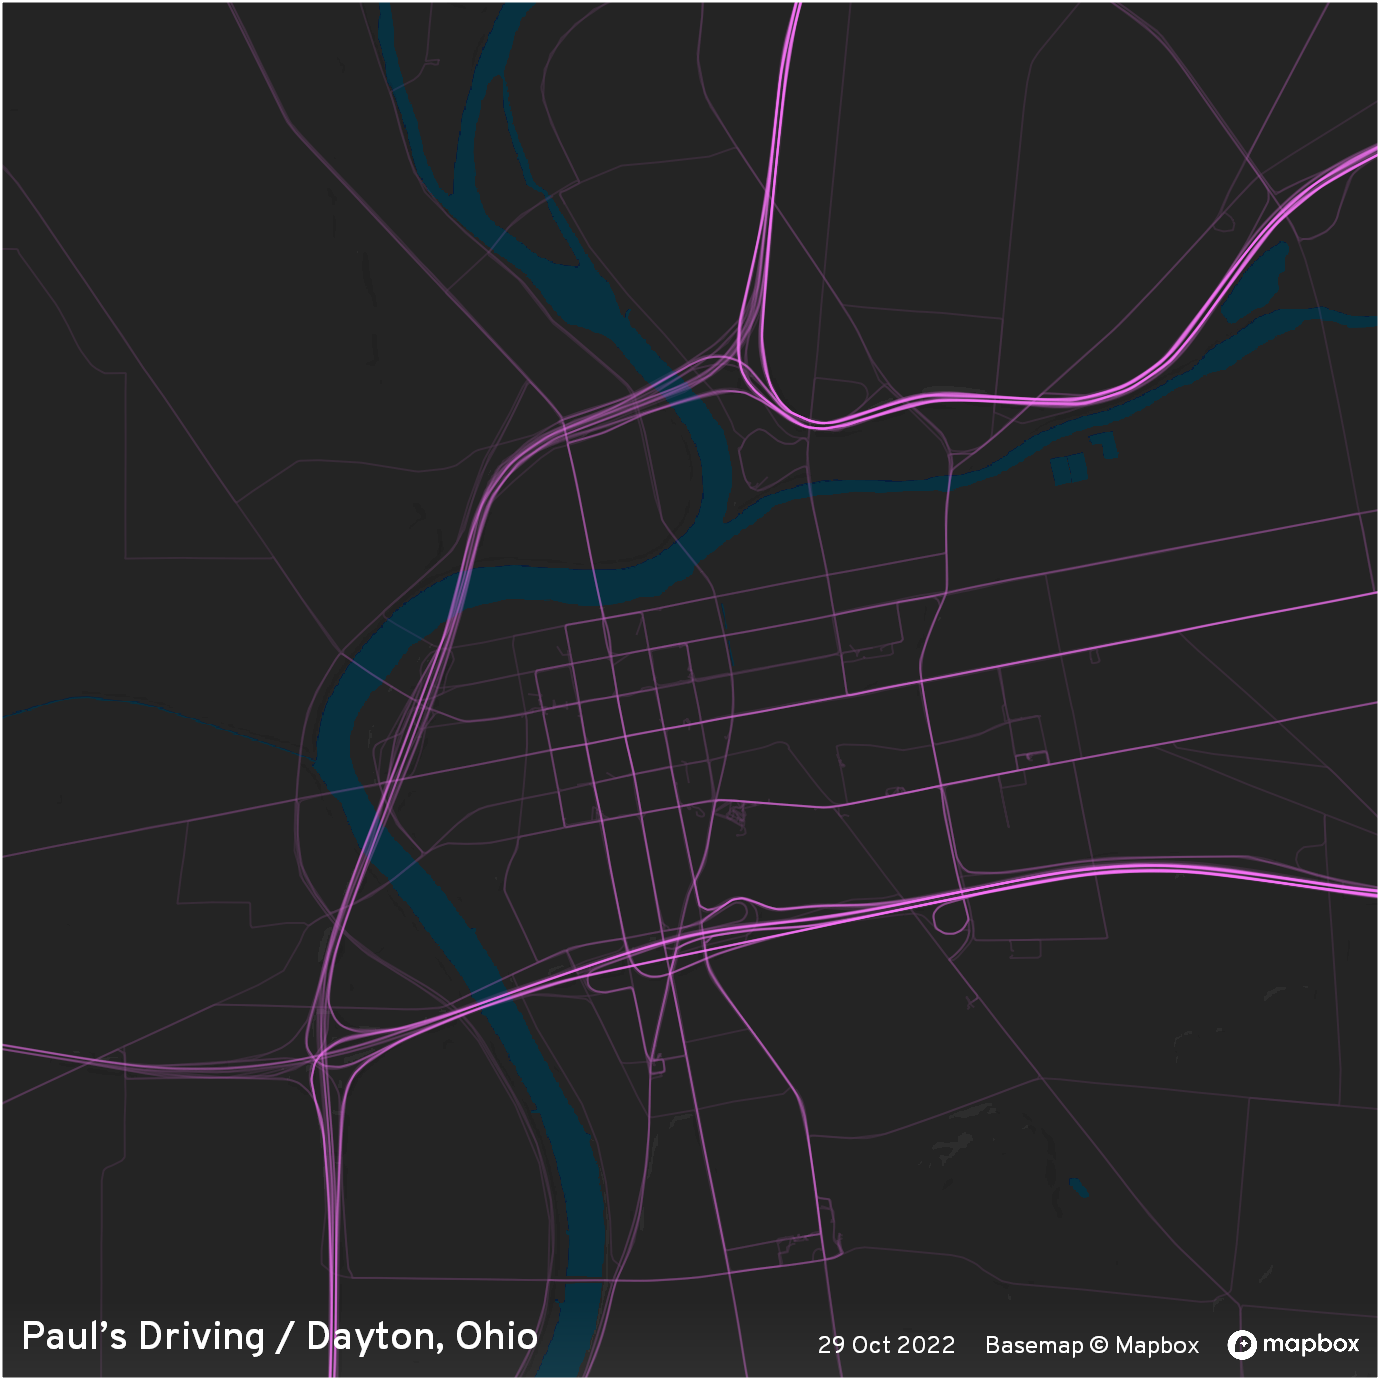 Driving density map of downtown Dayton, Ohio as of 29 Oct 2022.